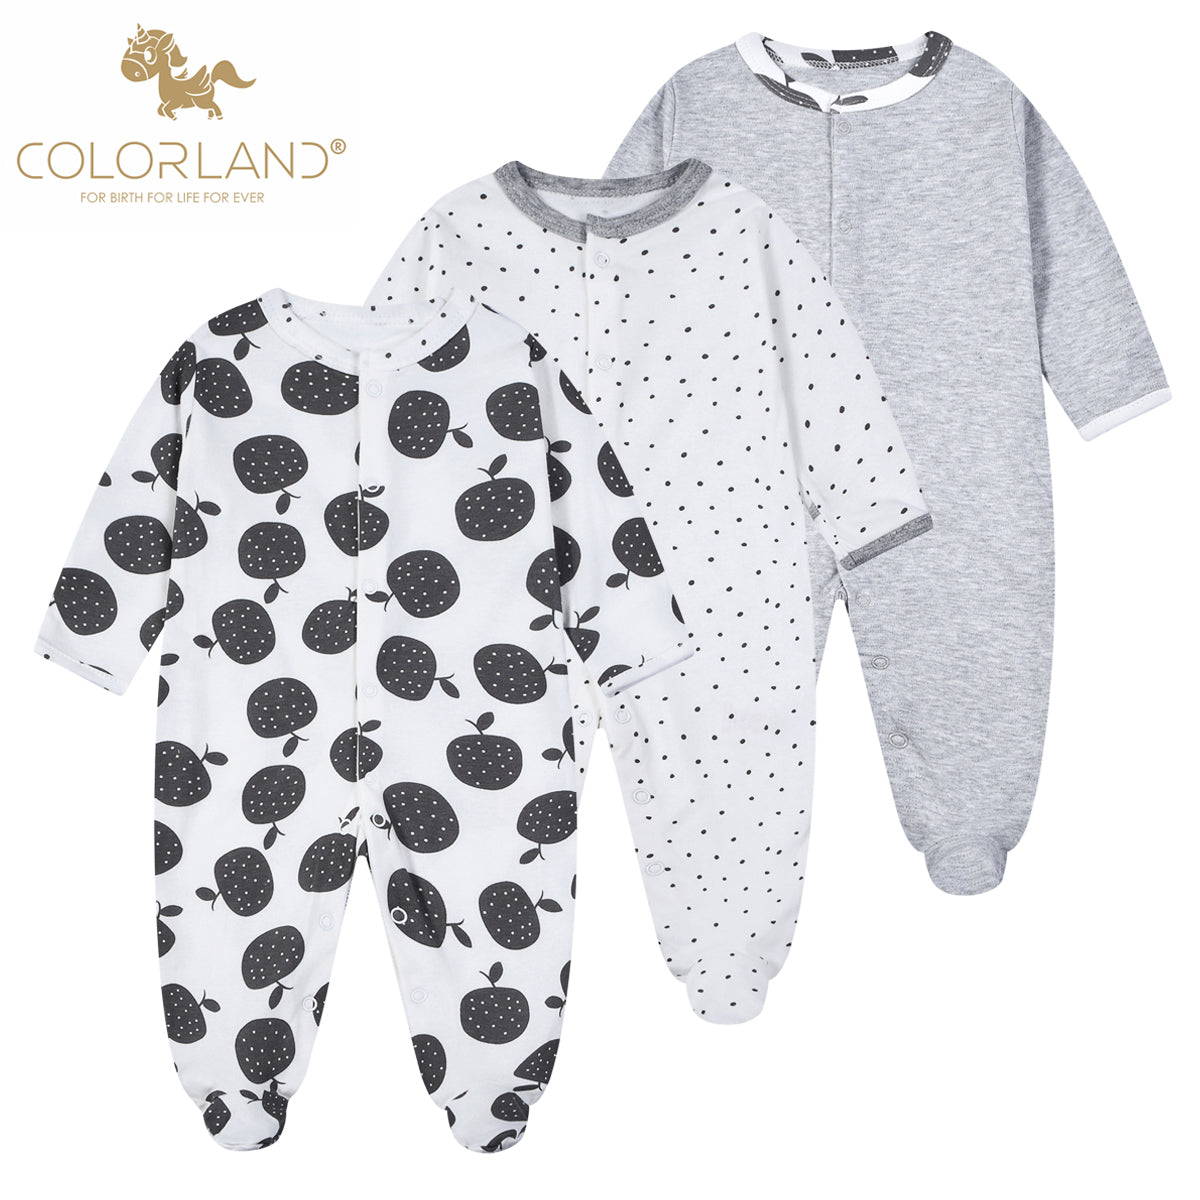 3-pack Colorland Unisex Baby Long Sleeve Sleepsuits Rompers